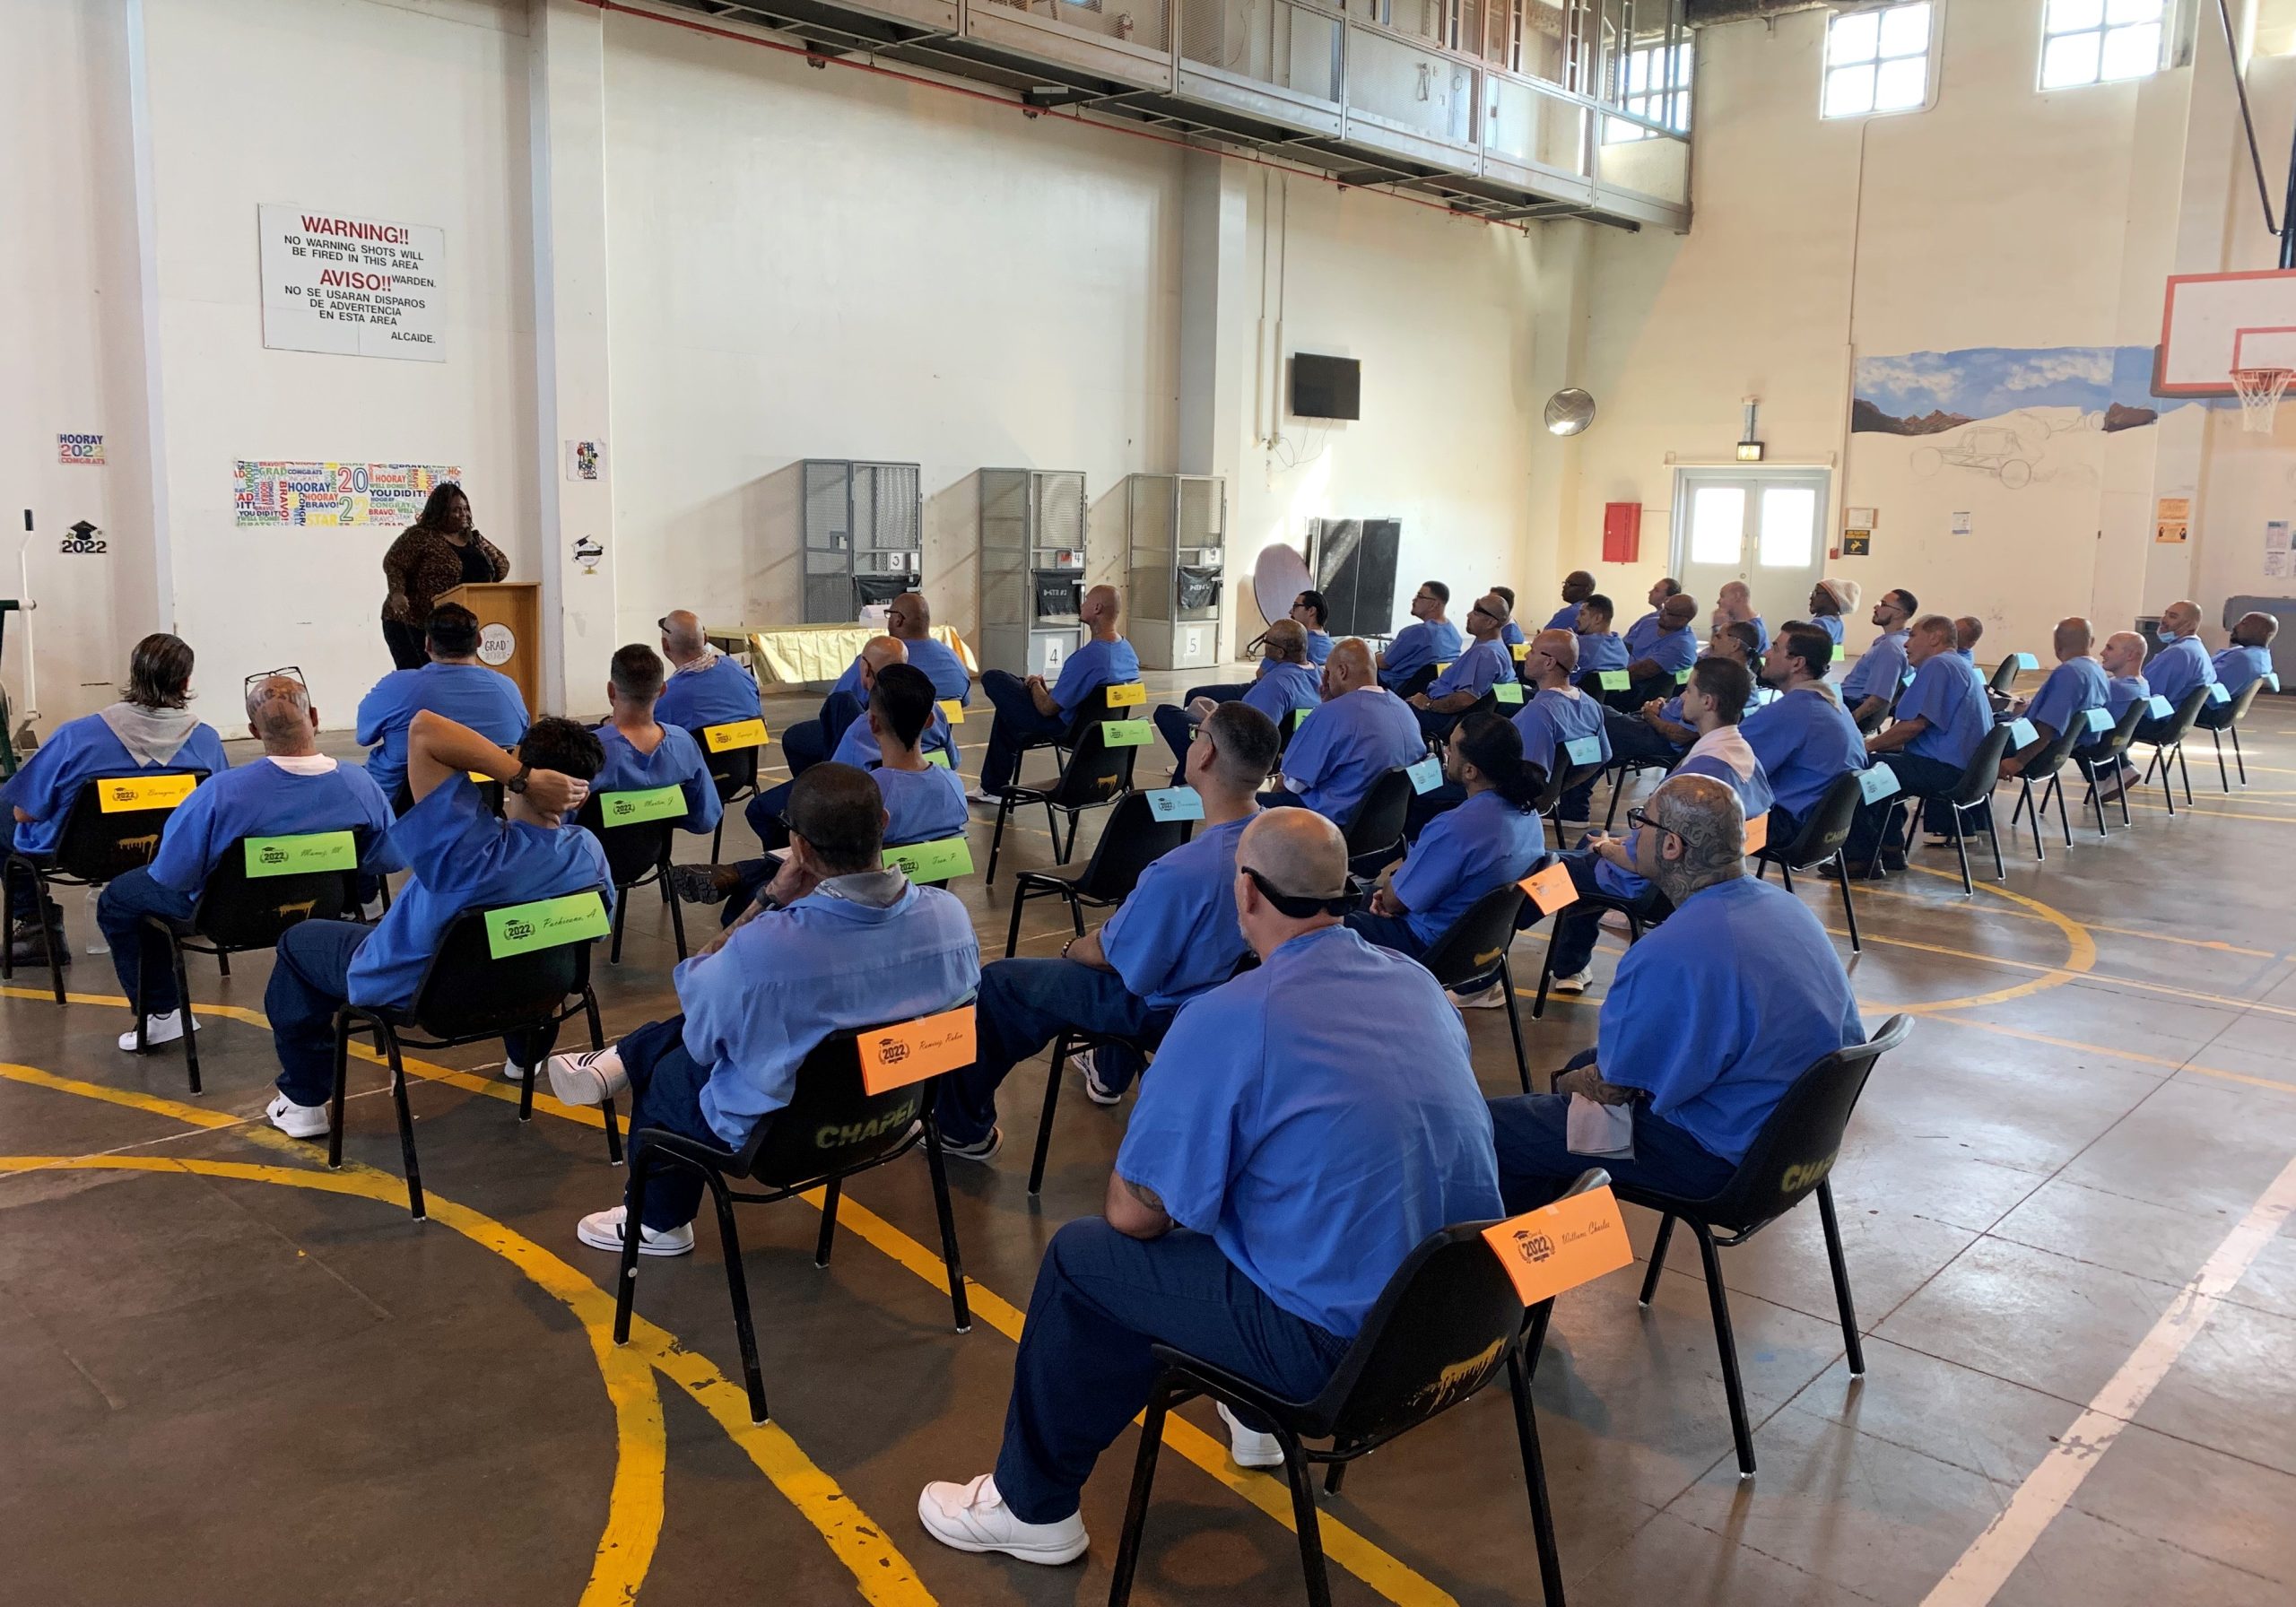 Incarcerated substance use disorder treatment (ISUDT) participants listen to a guest speaker at Centinela prison.